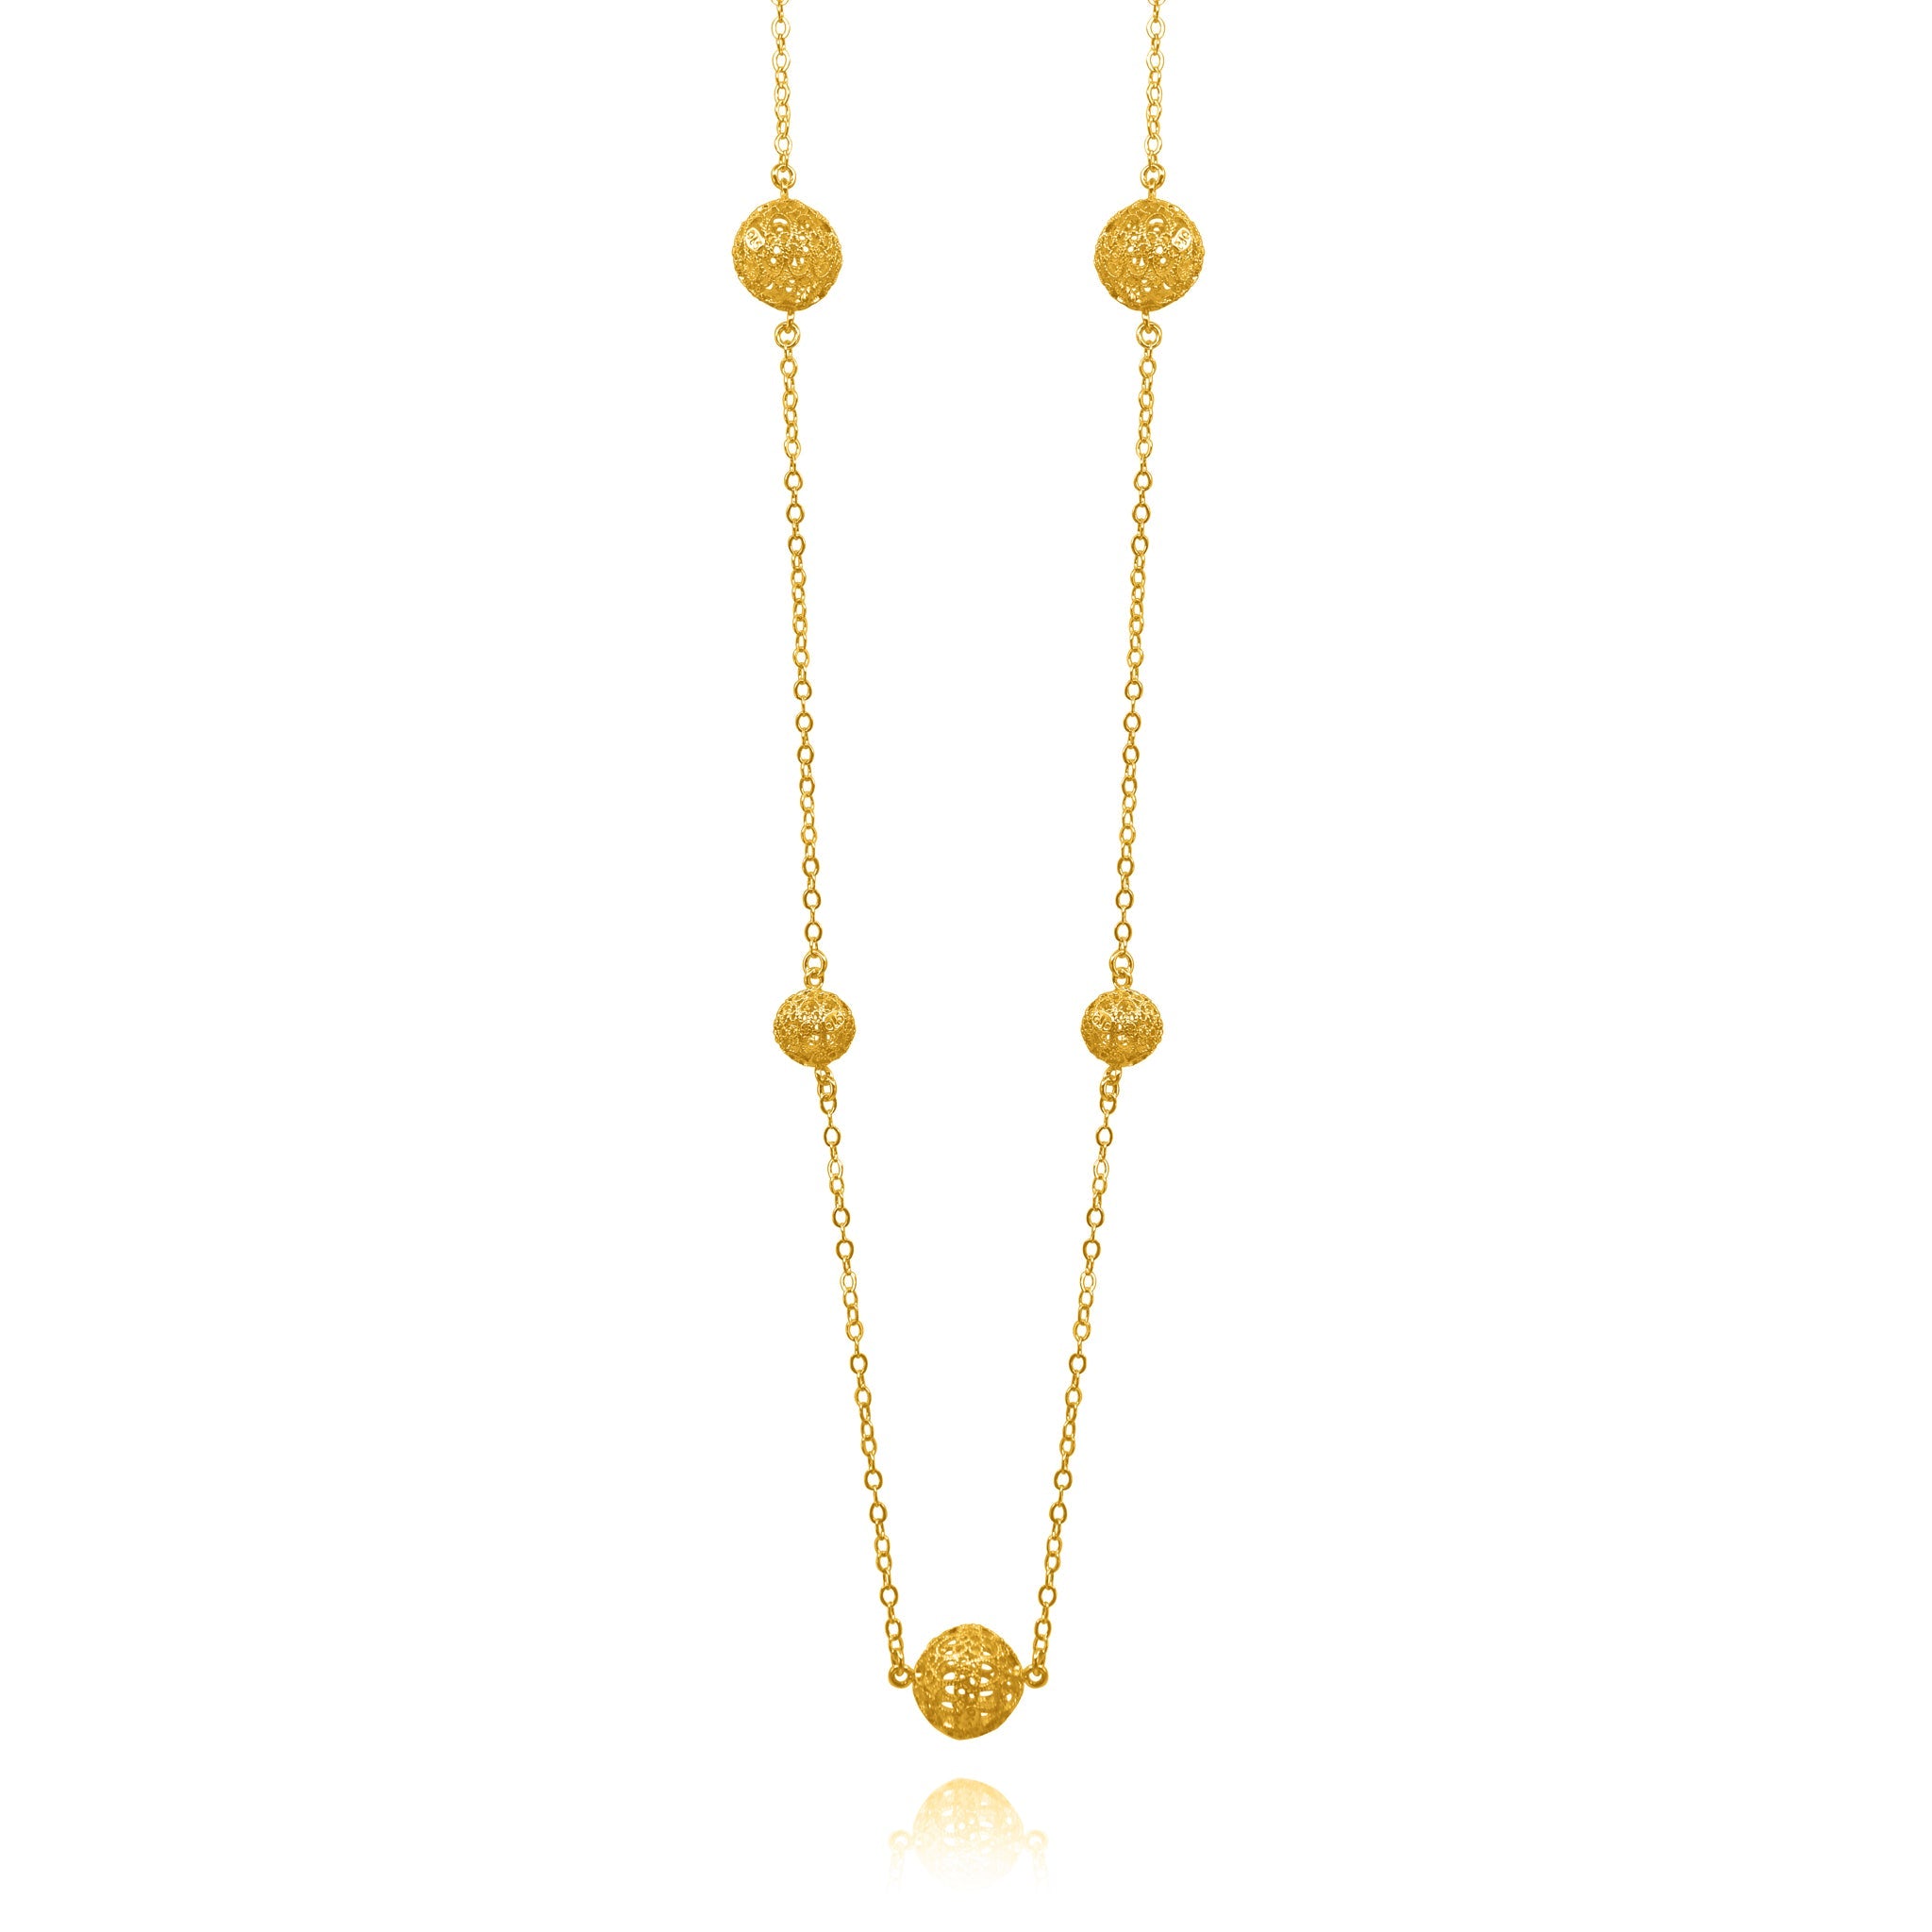 LUCRECIA GOLD LONG NECKLACE FIVE SPHERES FILIGREE